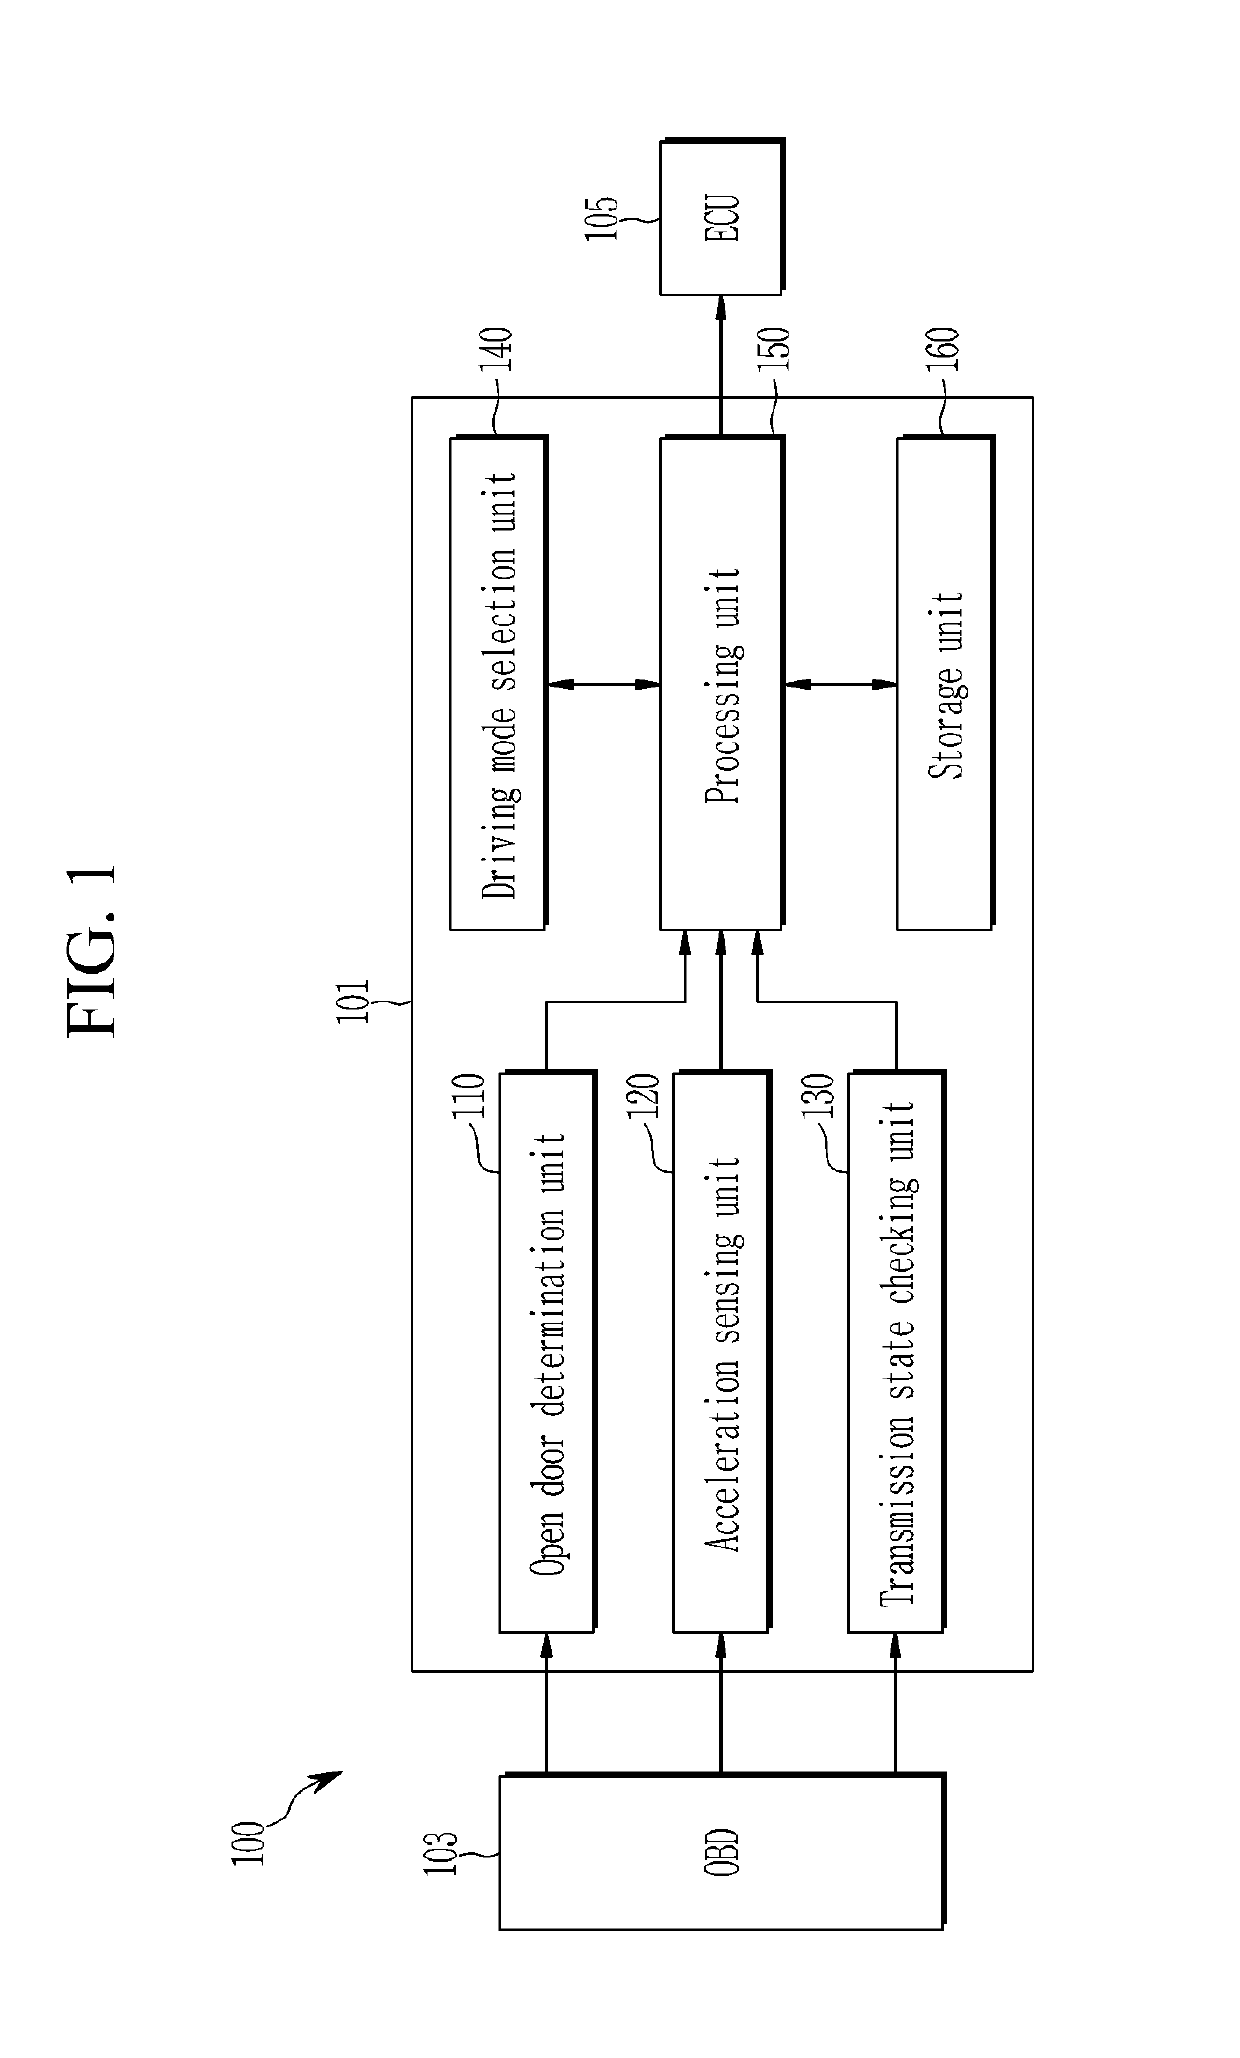 Vehicle control device and operating method therefor